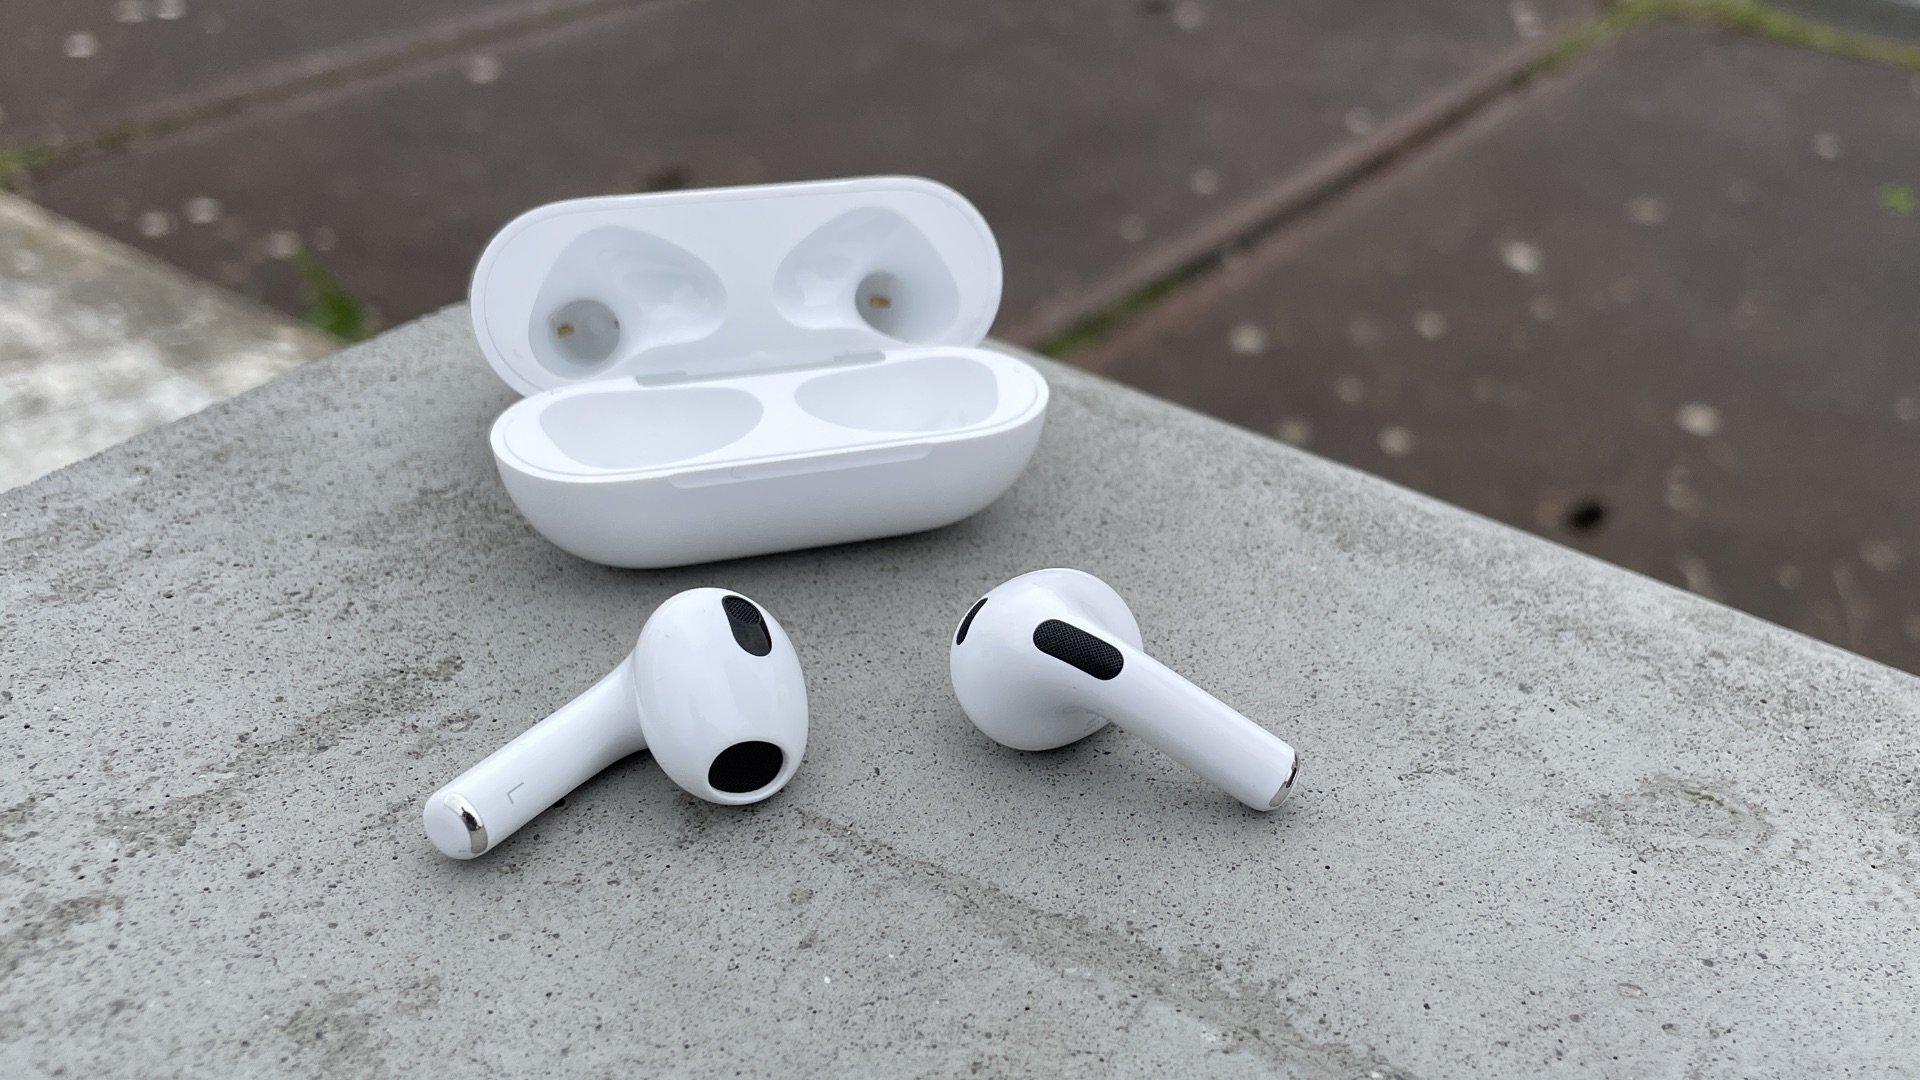 Huawei Freebuds 2 Pro Review - The Best Apple Airpod Alternative